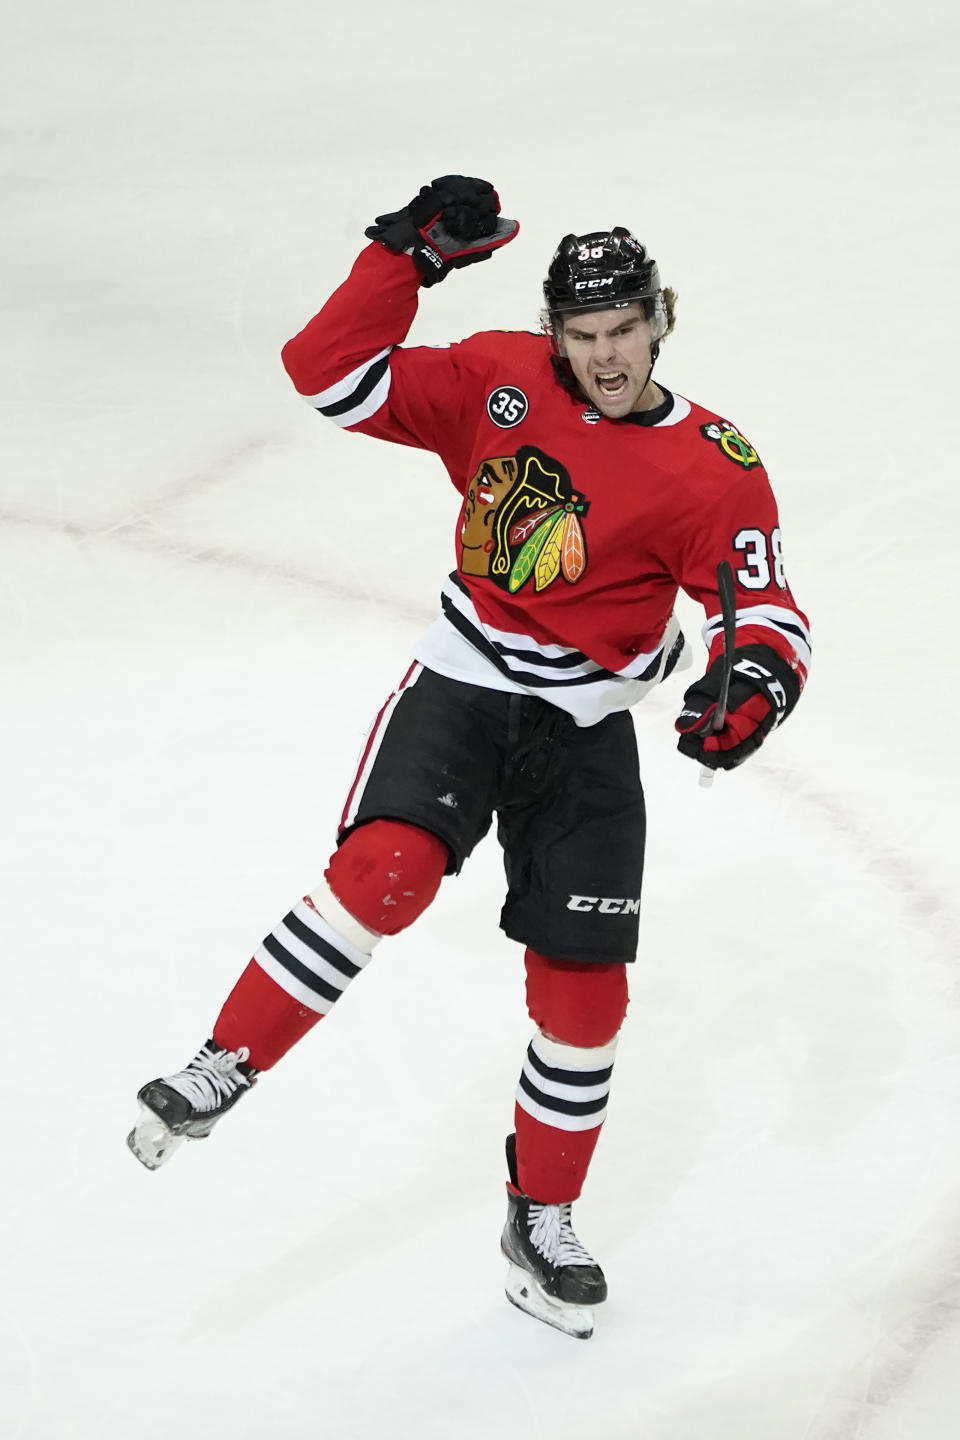 Chicago Blackhawks' Brandon Hagel celebrates his goal during the first period of an NHL hockey game against the Ottawa Senators Monday, Nov. 1, 2021, in Chicago. (AP Photo/Charles Rex Arbogast)